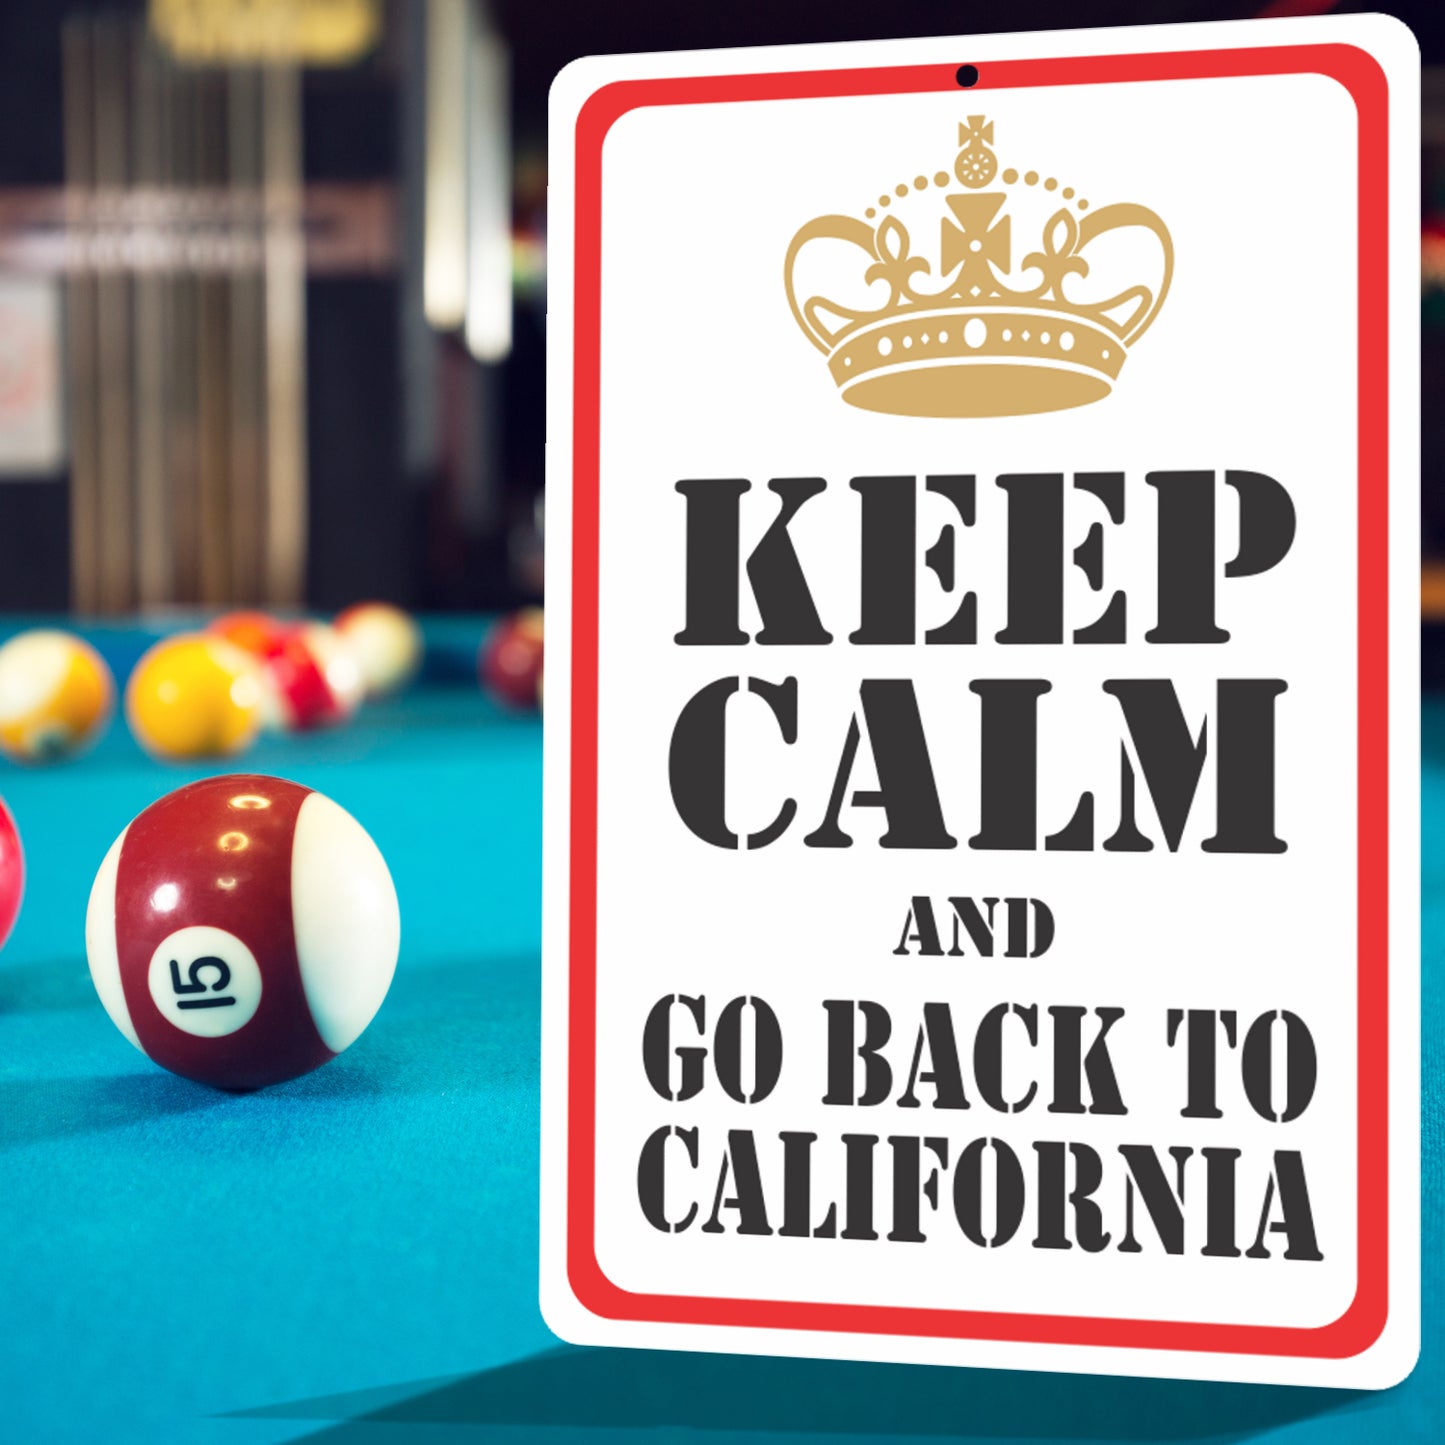 Funny Keep Calm Sign - Keep Calm and Go Back to California Sign - Size 8 x 12